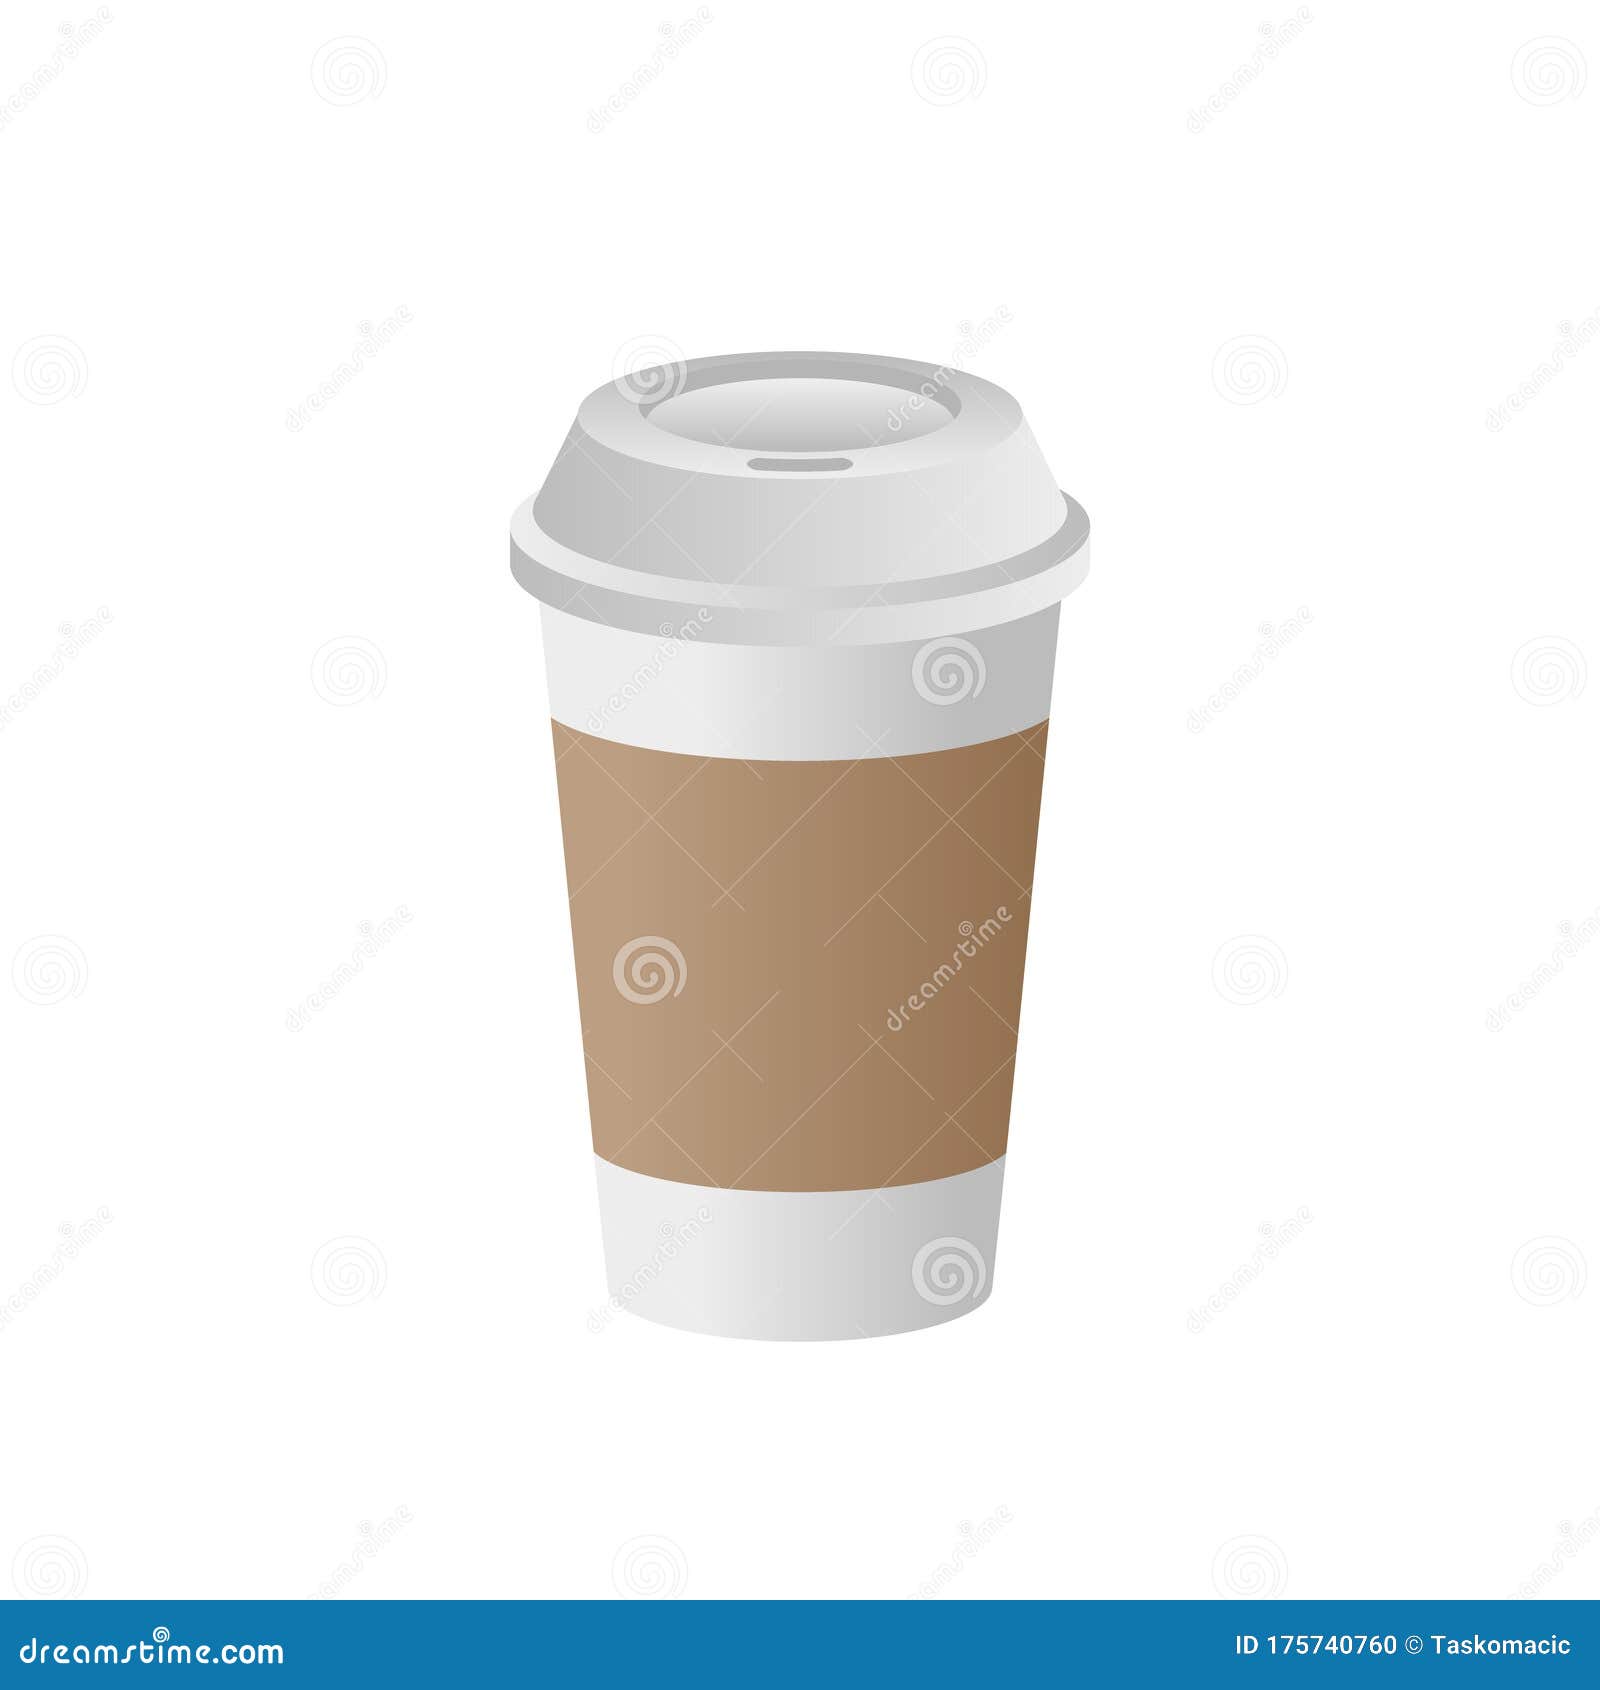 Download White Paper Cup With A Lid And A Sleeve Mockup. Realistic Disposable Coffee Cup On White ...